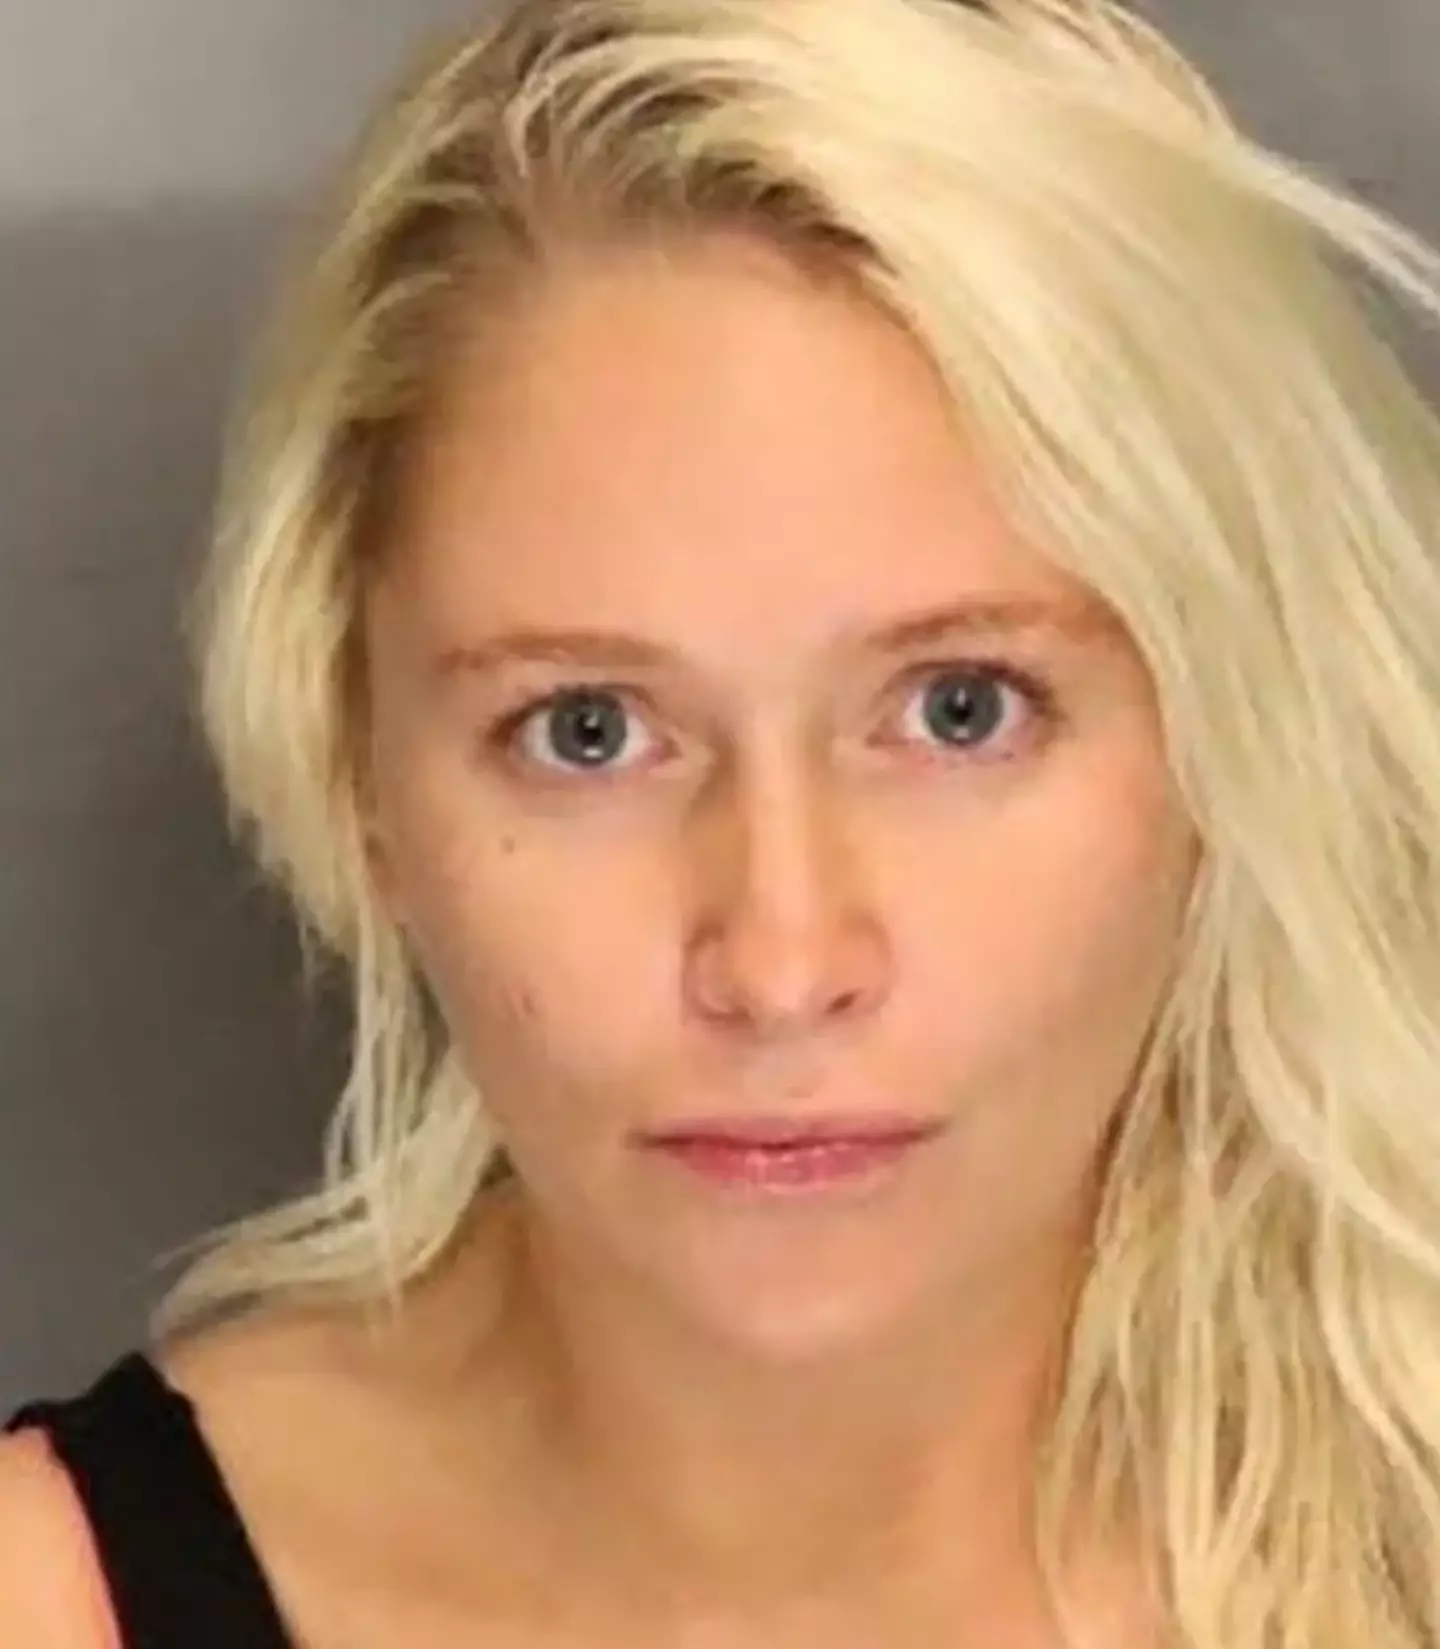 A former Playboy model could face up to 25 years behind bars after a 71-year-old man was found dead in the boot of her car.